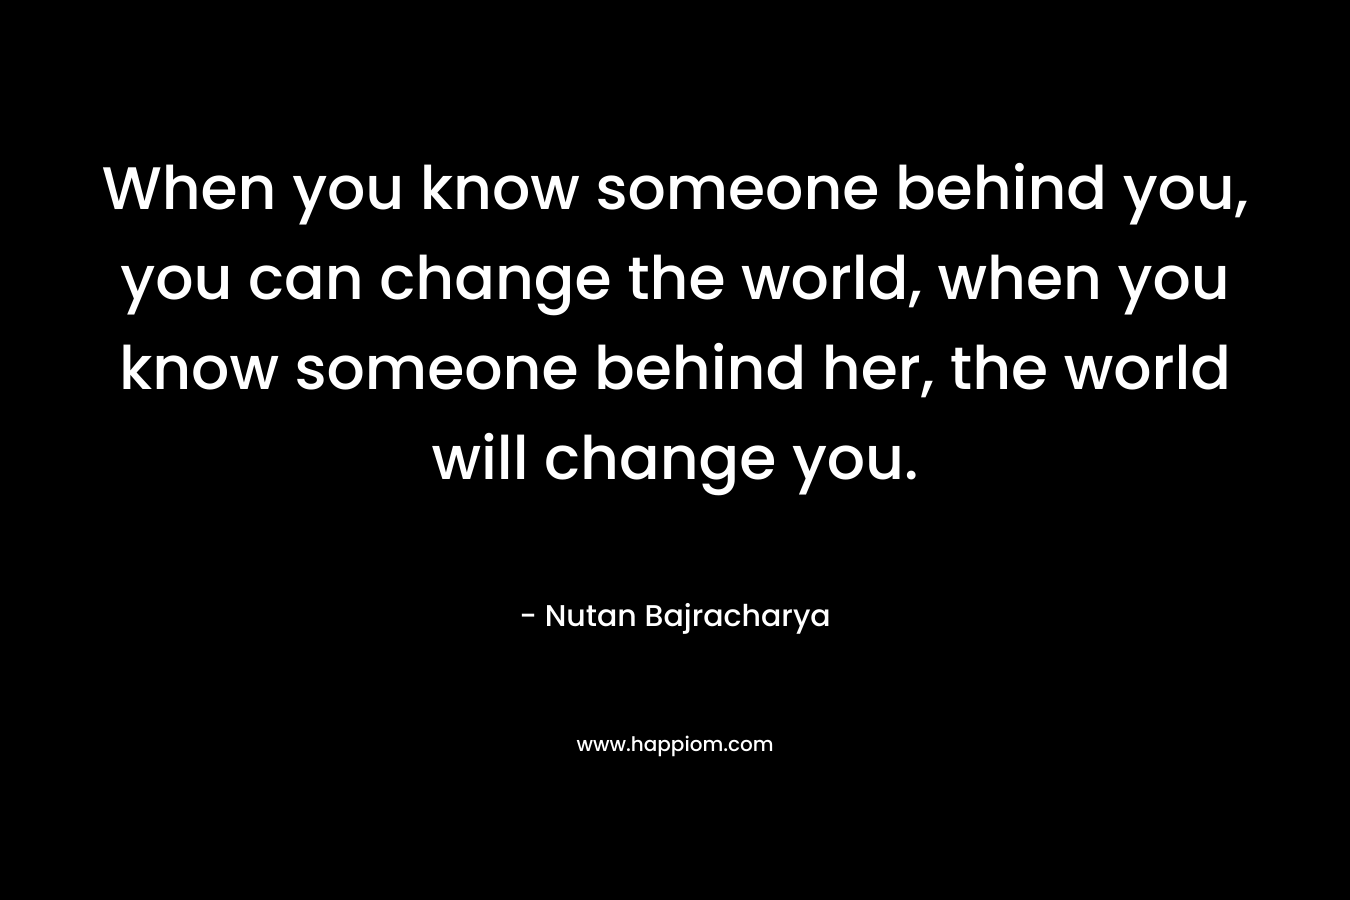 When you know someone behind you, you can change the world, when you know someone behind her, the world will change you.